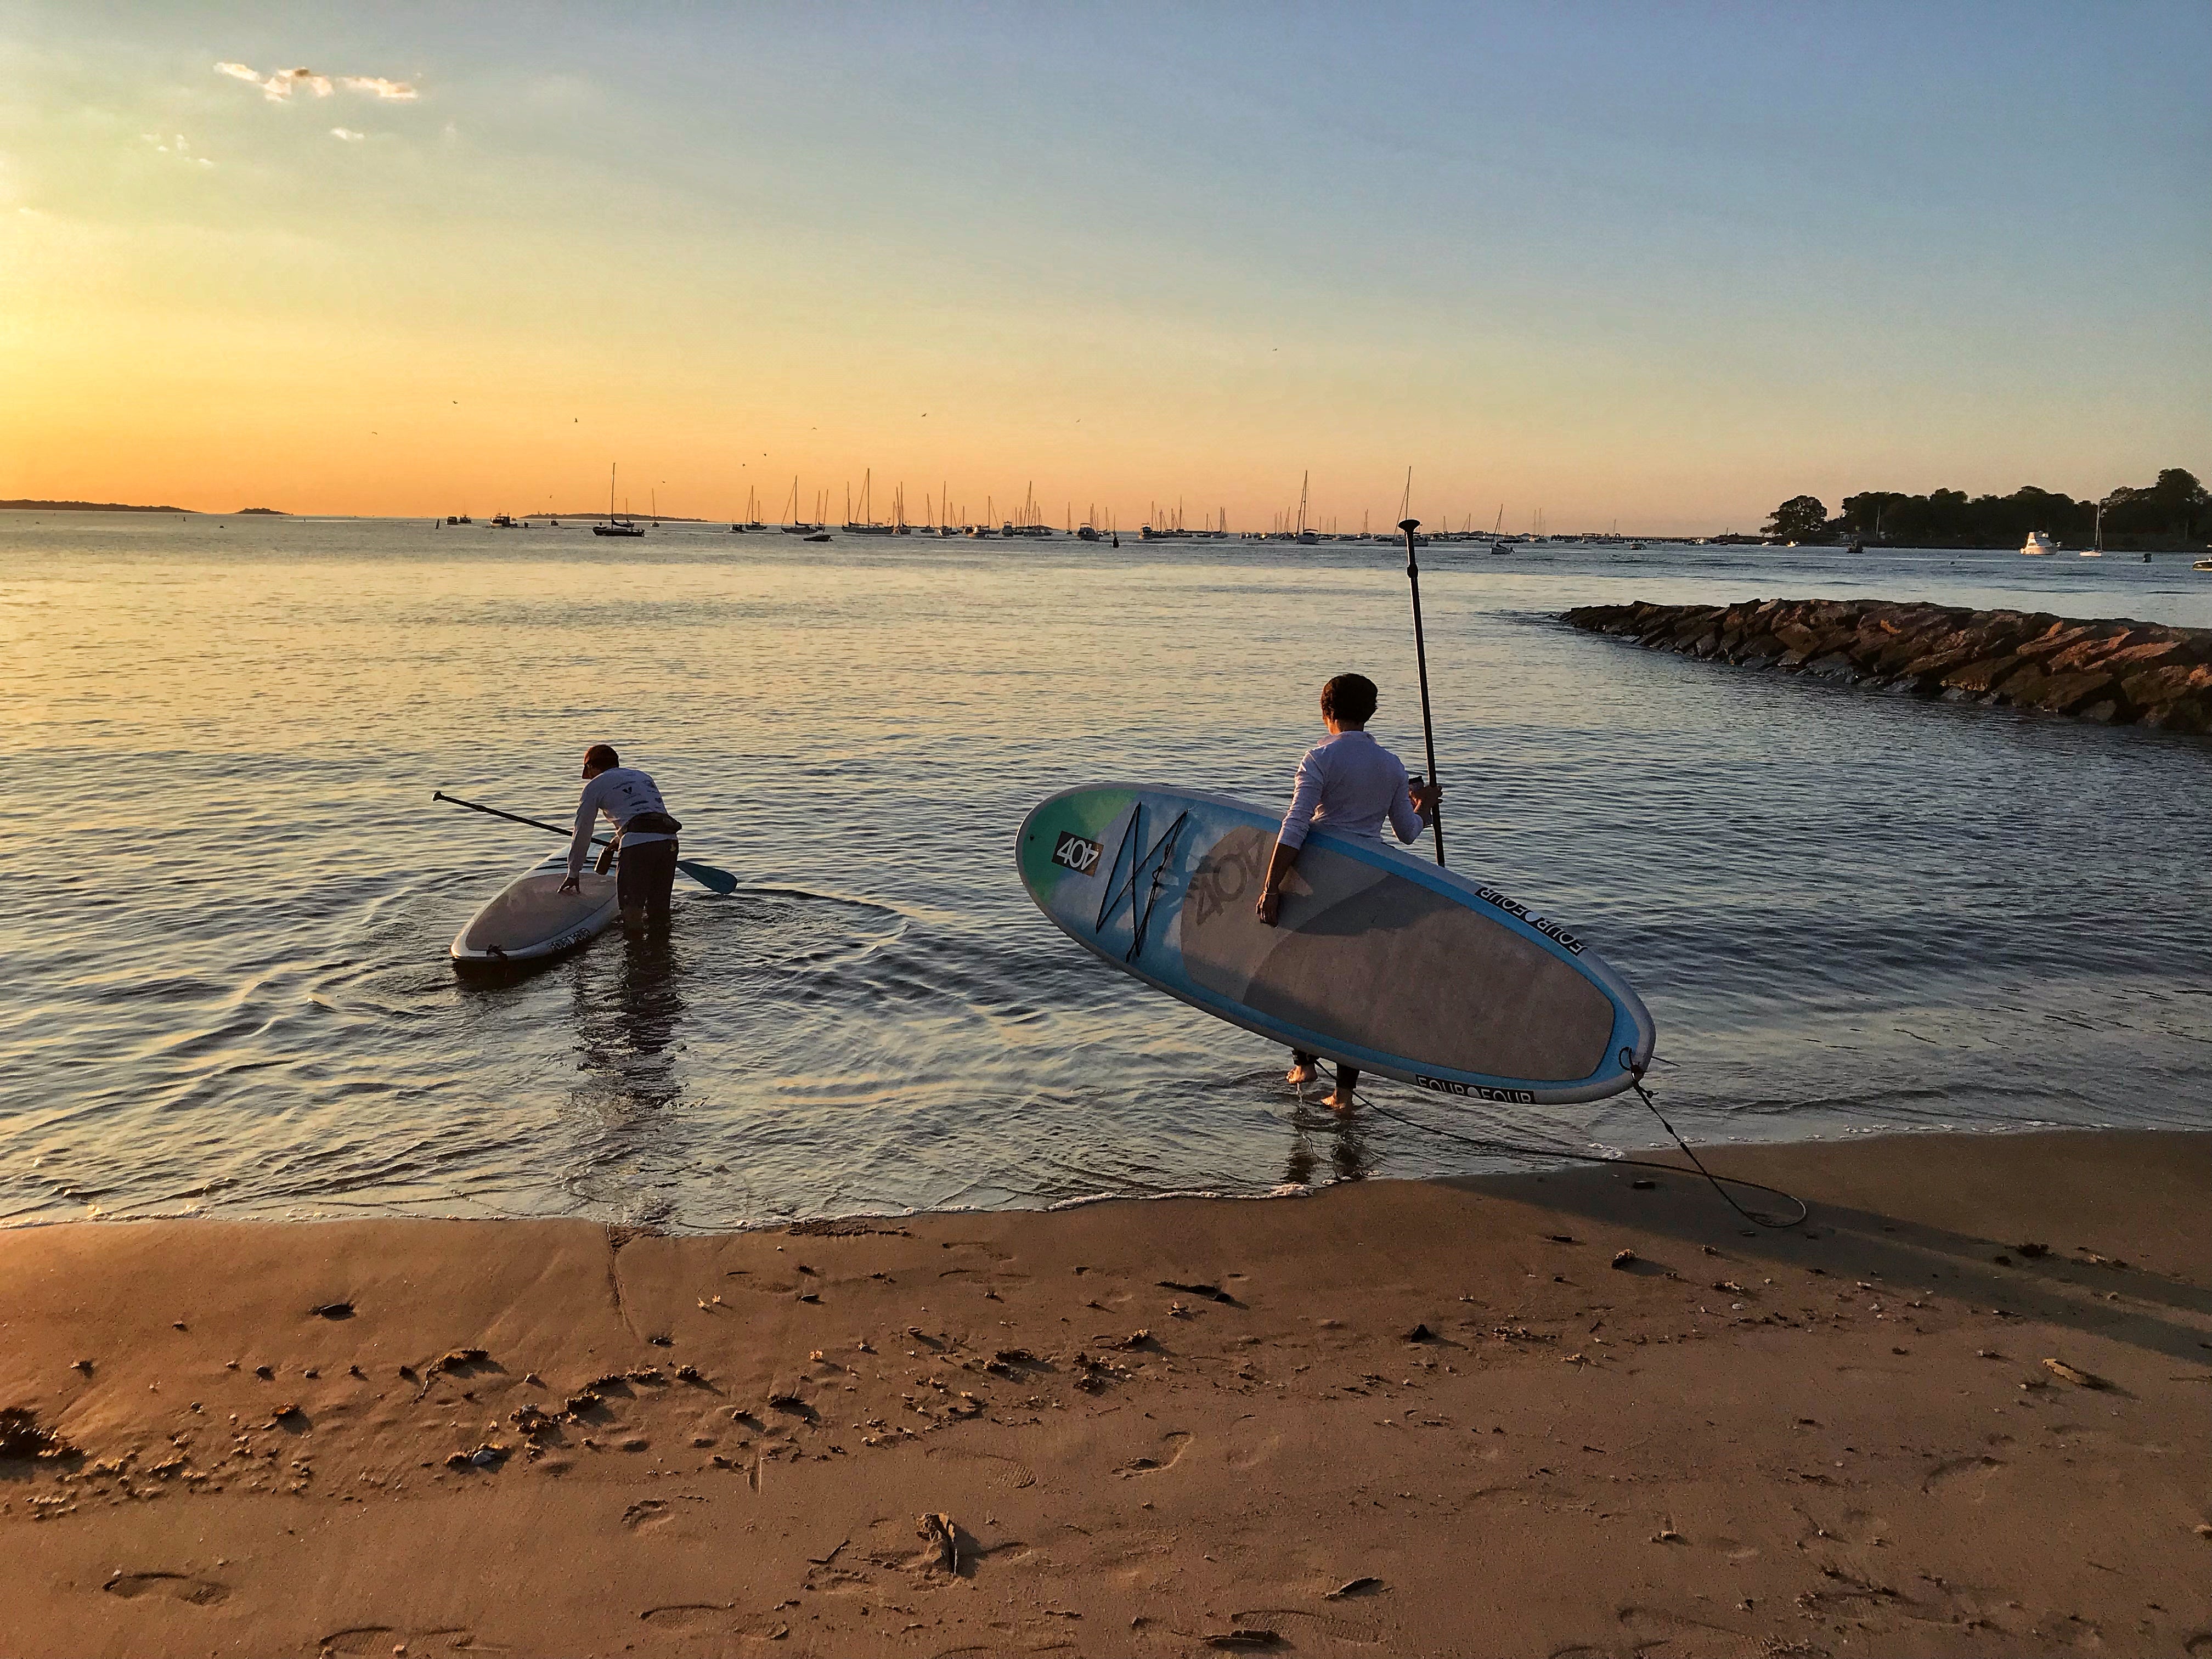 Rental Packages For Paddleboards, and Single or Tandem Kayaks